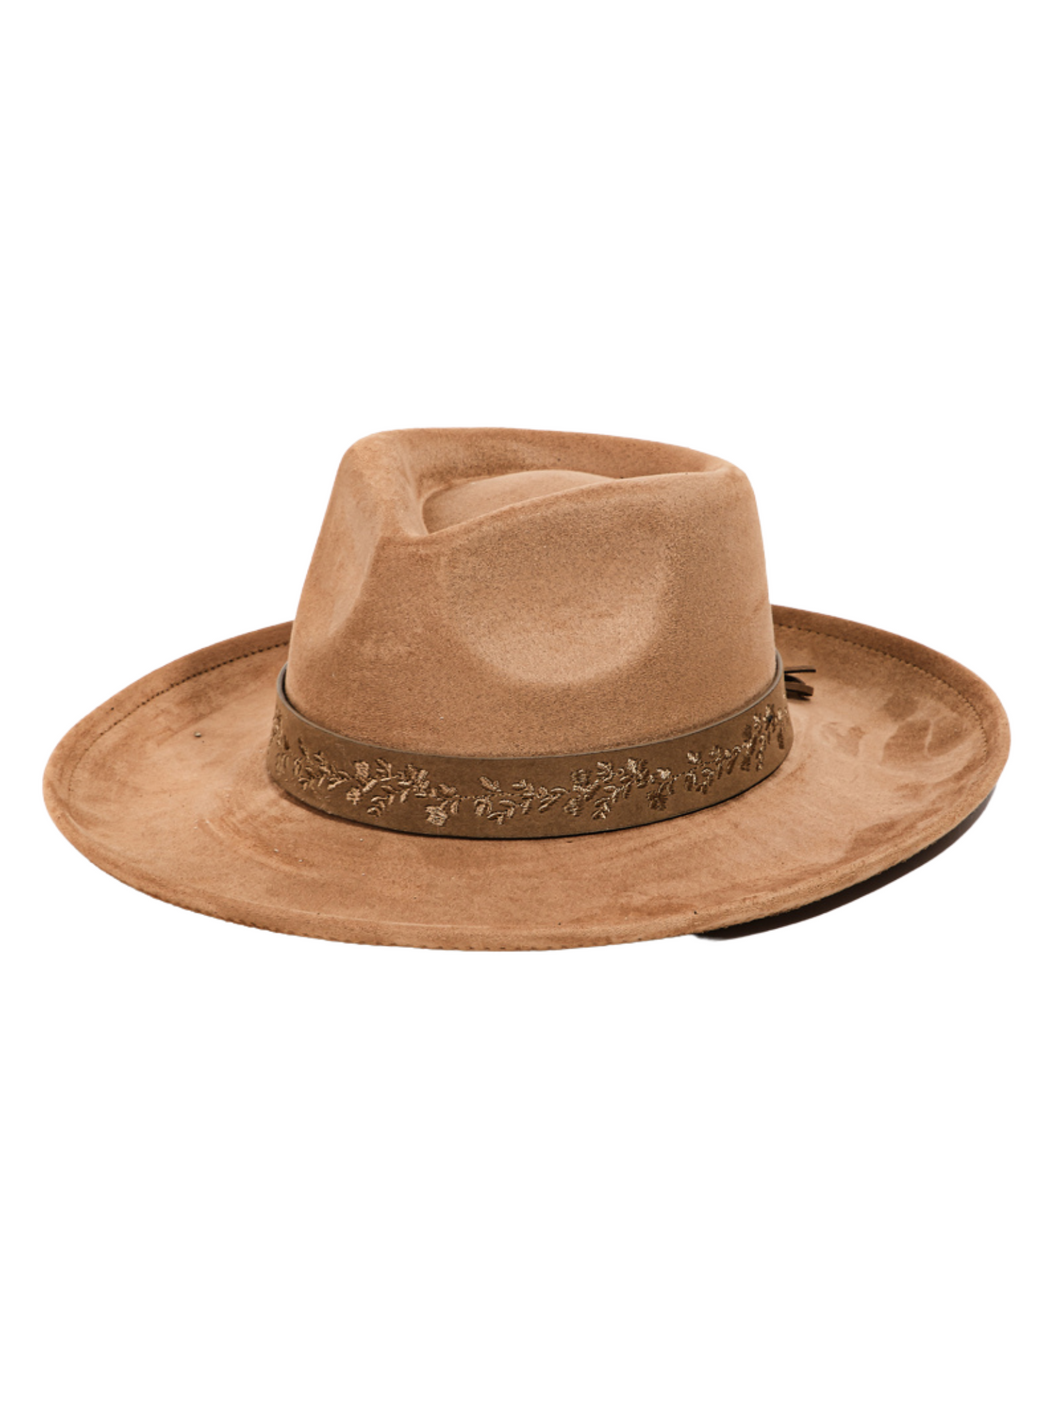 SUEDE LEATHER HAT W/ EMBROIDERED BAND | BROWN